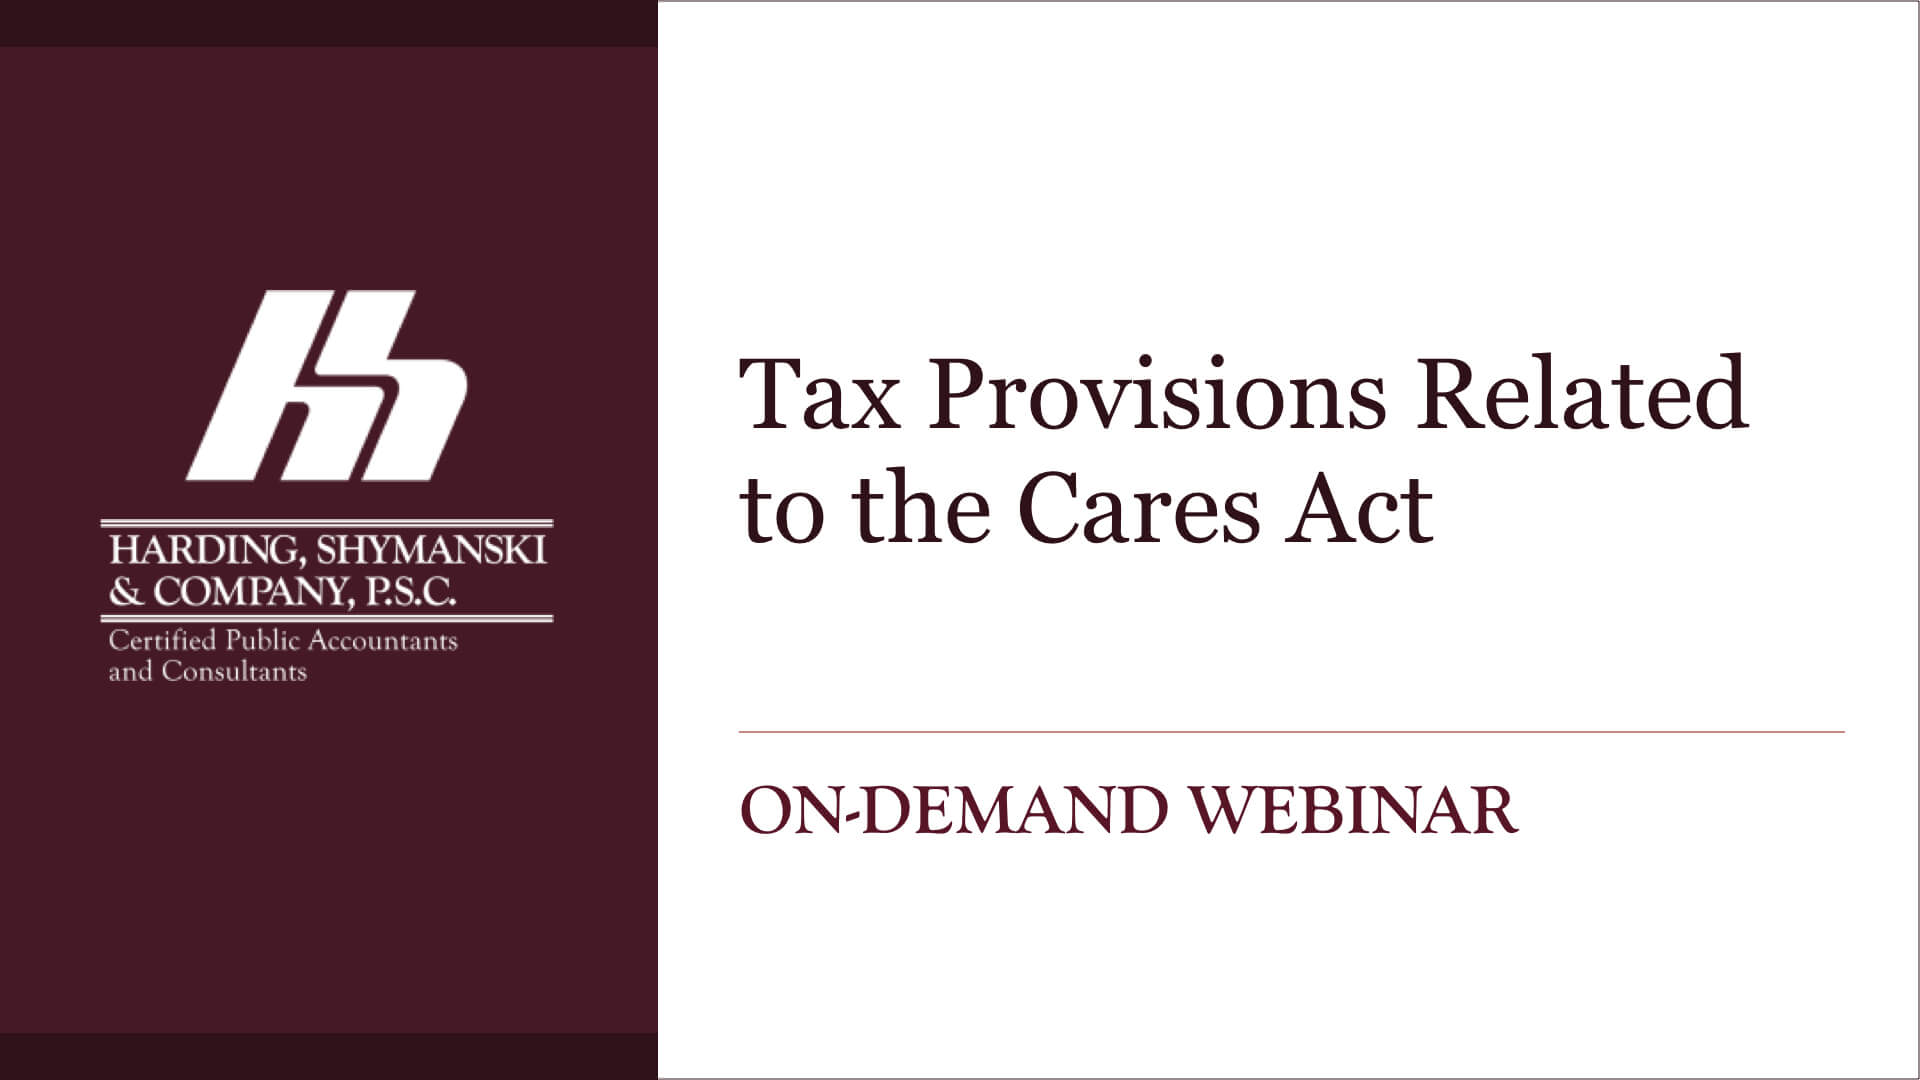 Tax Provisions Related to the Cares Act